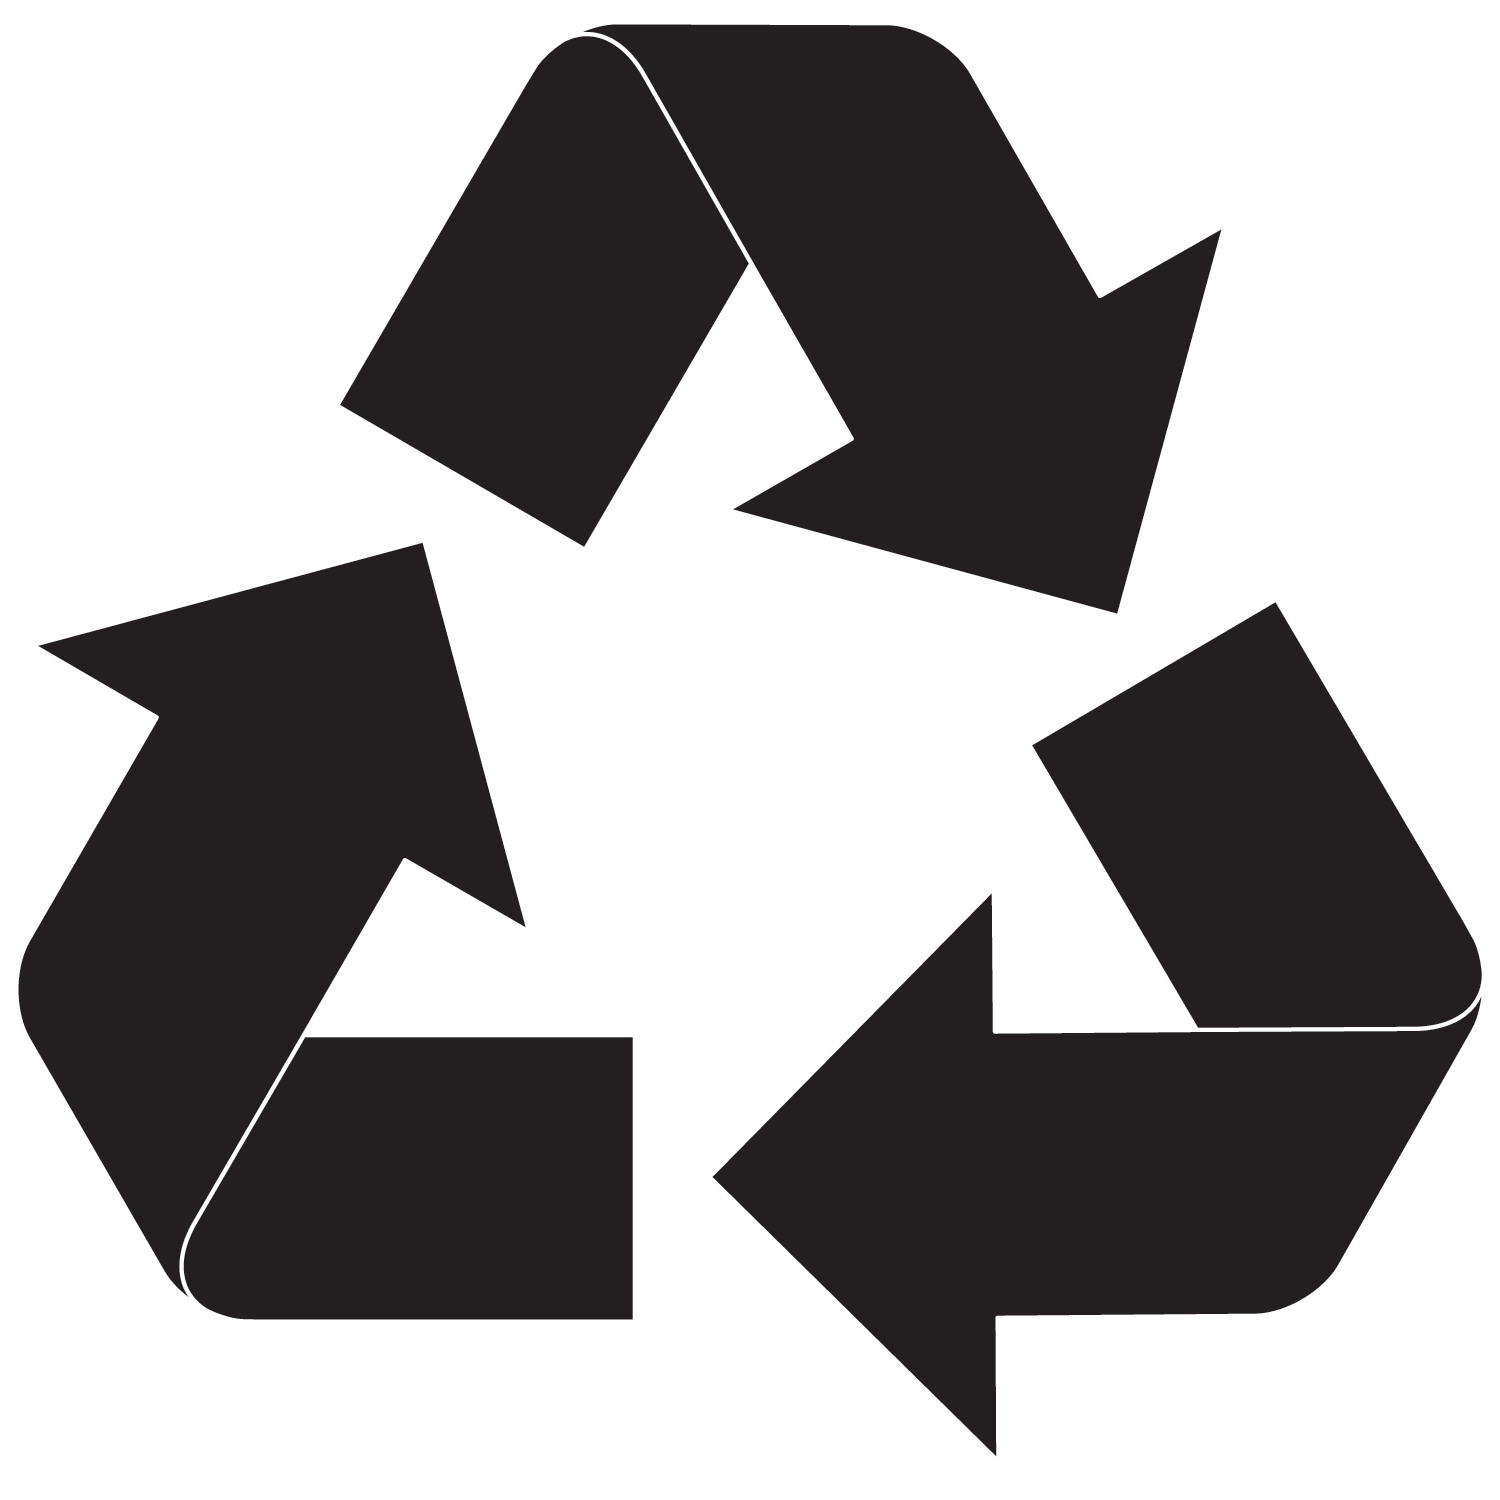 25 Recycle Symbol Clip Art Free Cliparts That You Can Download To You    